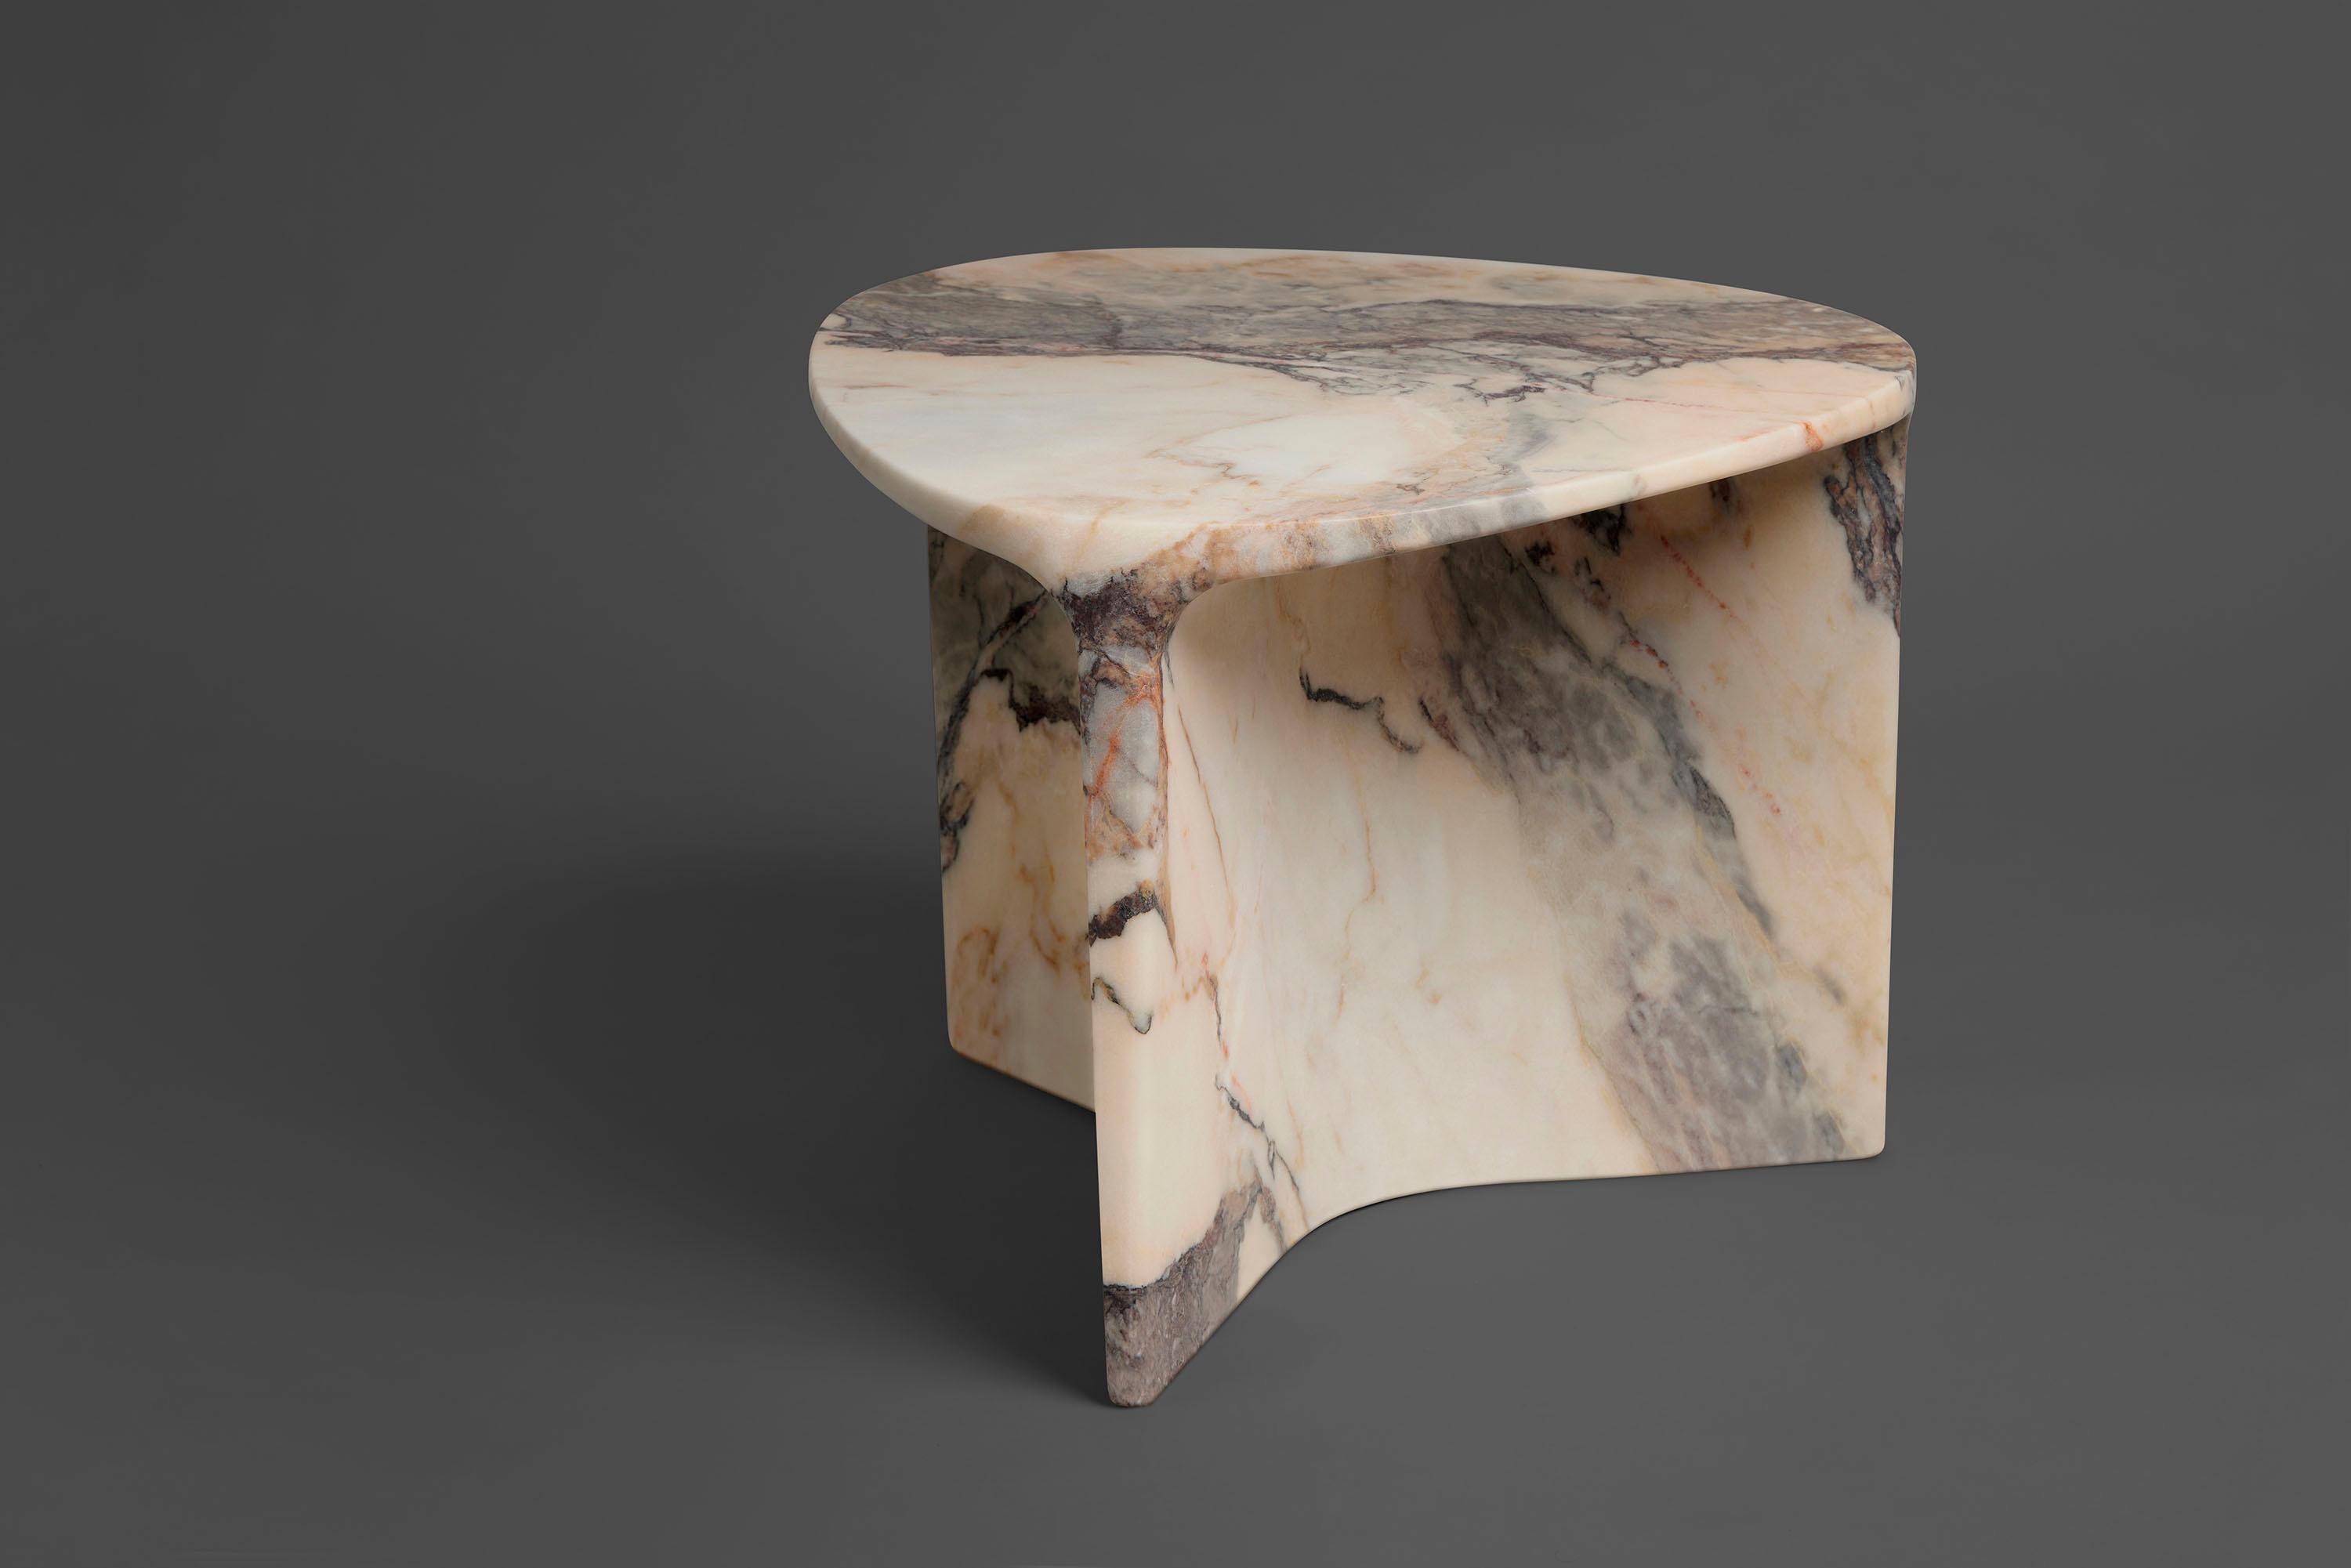 Carv occasional table is Cut from a single block of Calacatta Viola marble.
Essential and organic design, naturally creating a flat tabletop flowing
to a Y - shaped foot, revealing the stone’s veins
from the exterior surface through to it’s